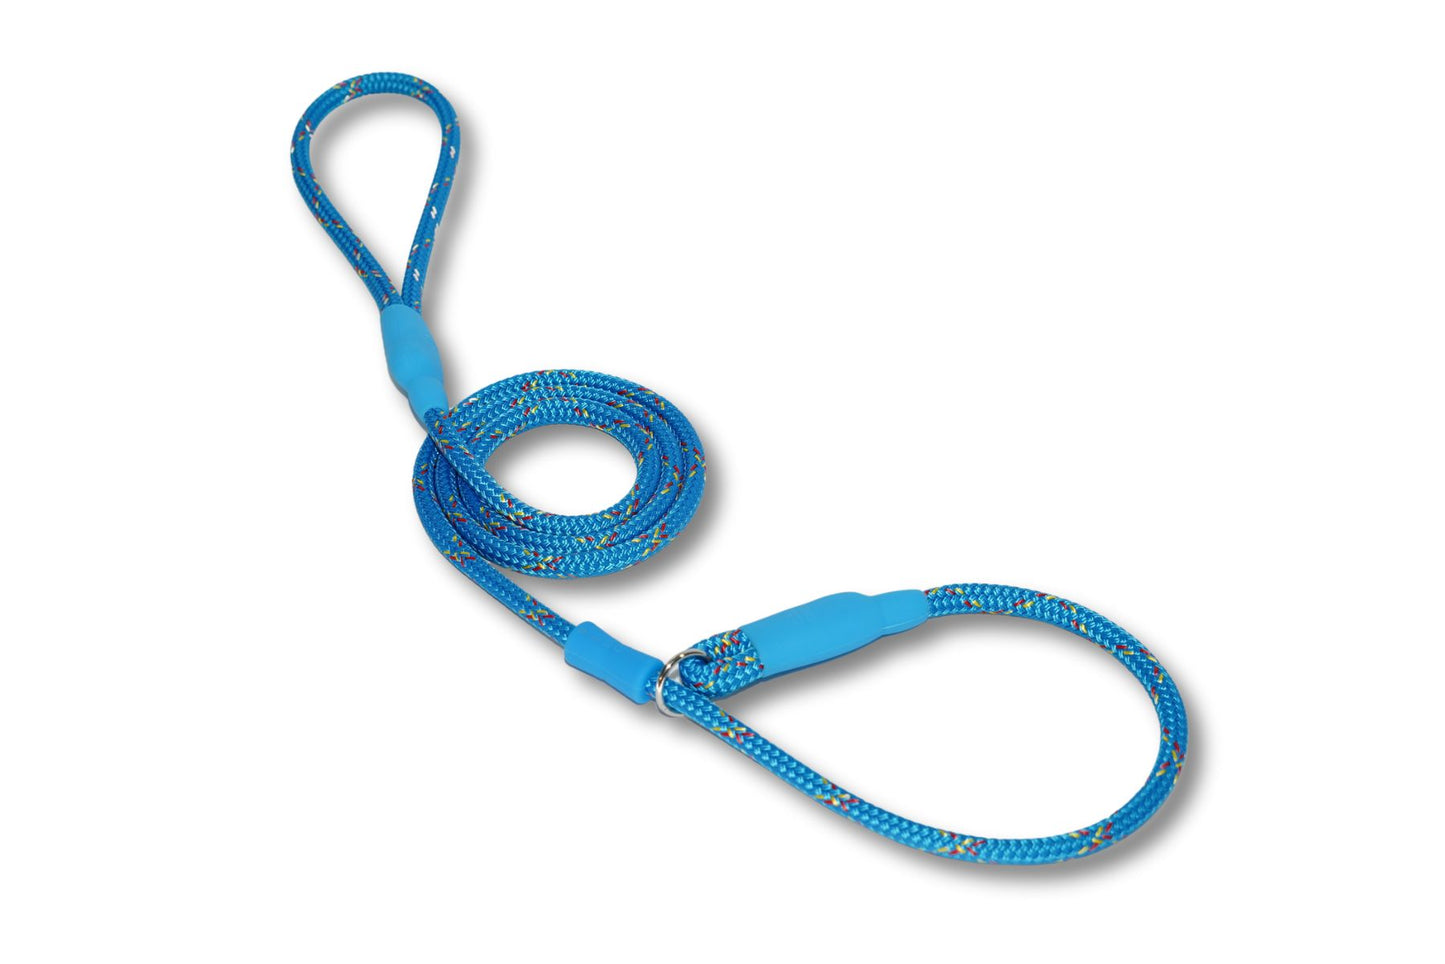 DNA - Ascent - Slip Lead - Strong Marine Rope Construction